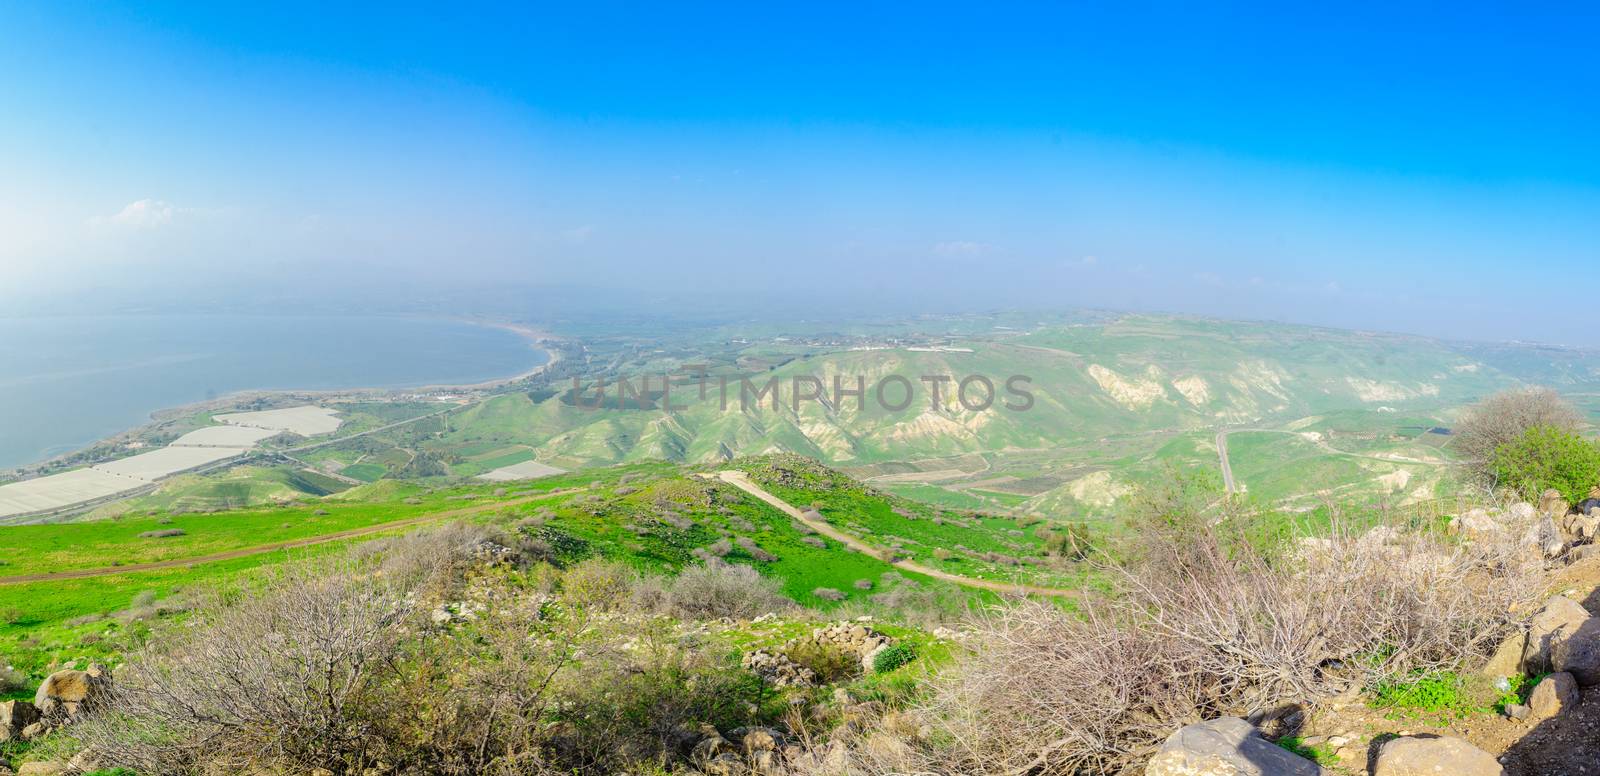 Panoramic view of the Golan Heights and the northern part of the Sea of Galilee, Northern Israel